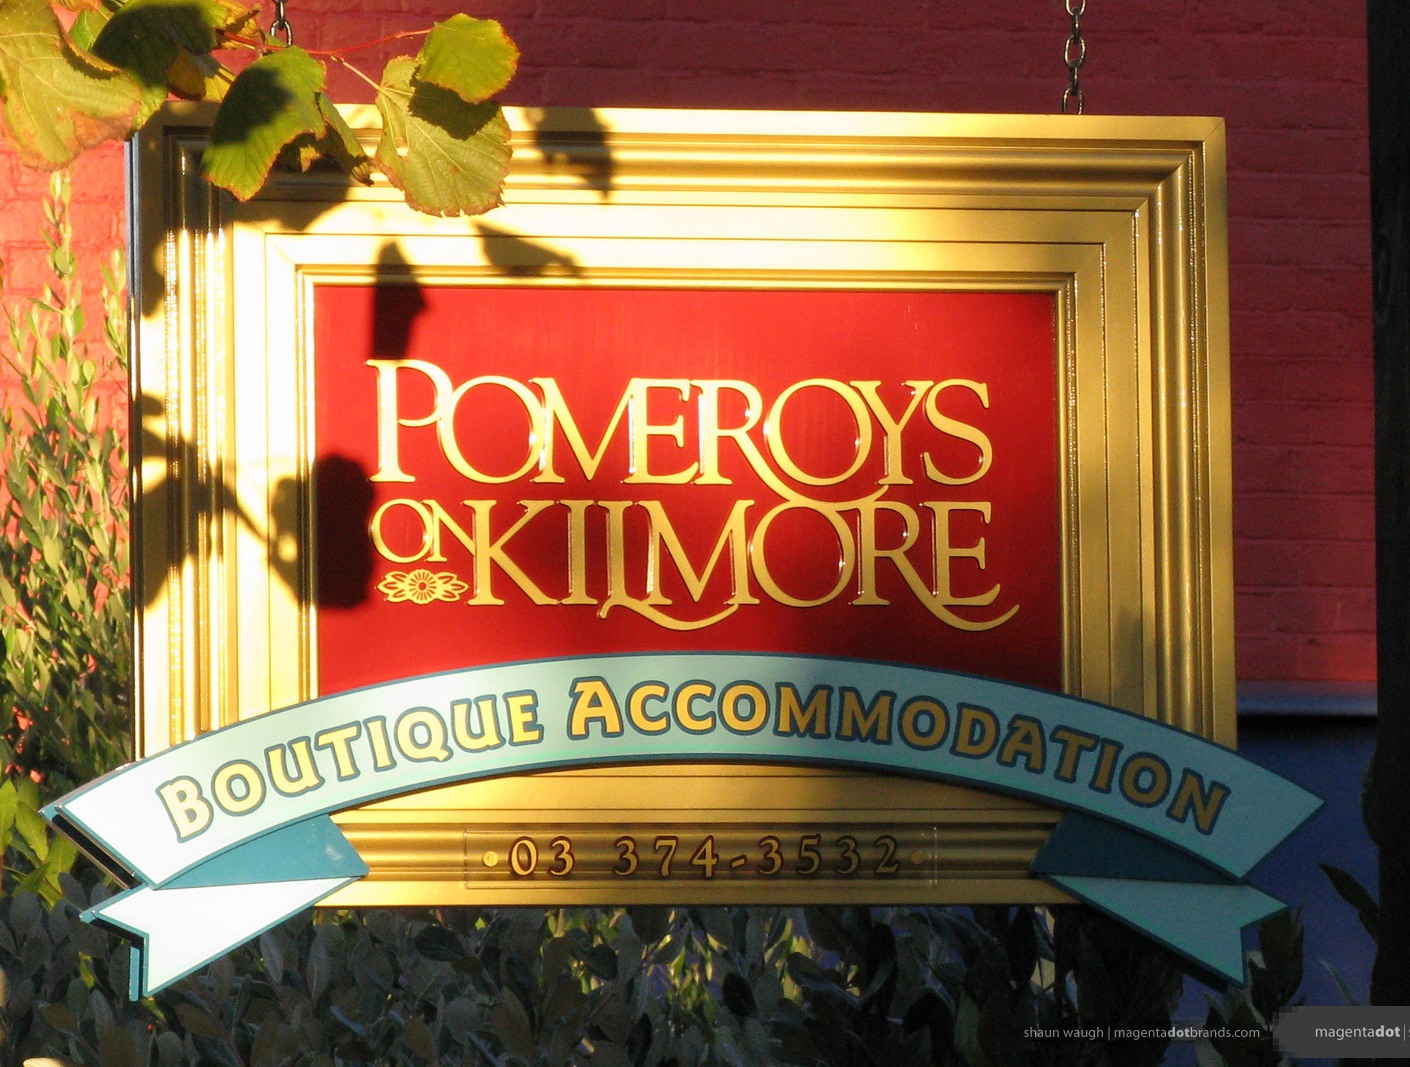 Pomeroys Boutique Accommodation logo and hand-crafted three dimensional sign.